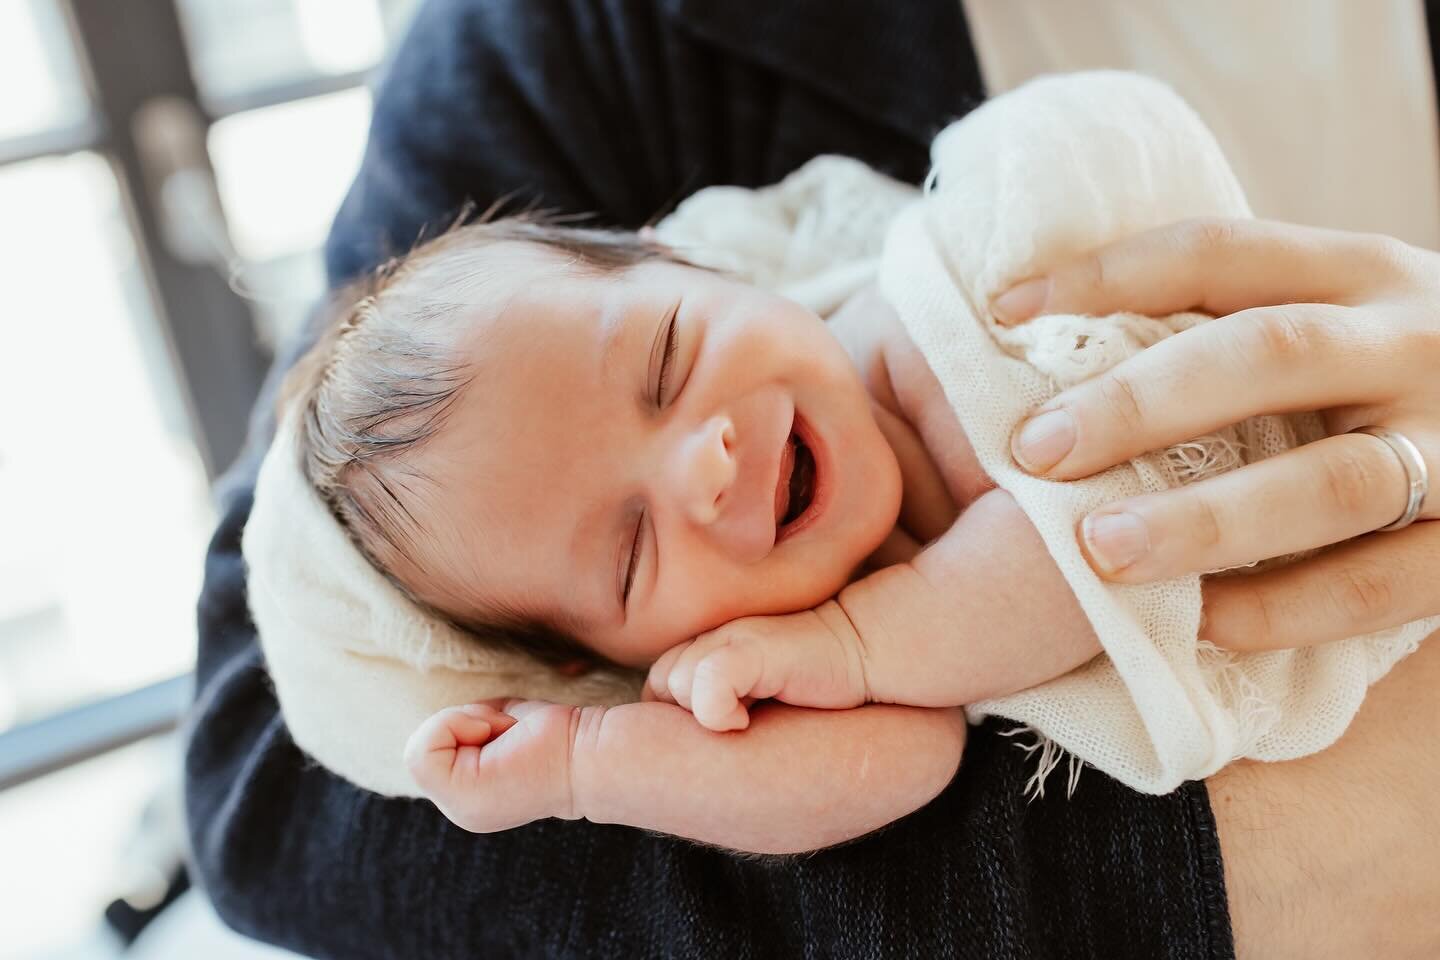 We all needed this little baby smile today. Enjoy the little things. 

#newborn #lifestylenewborn #newbornsession #njnewbornphotographer #njnewbornphotography #newbornphotographer #newbornphotography #newborns #babysmile #precious #njphotographer #ny